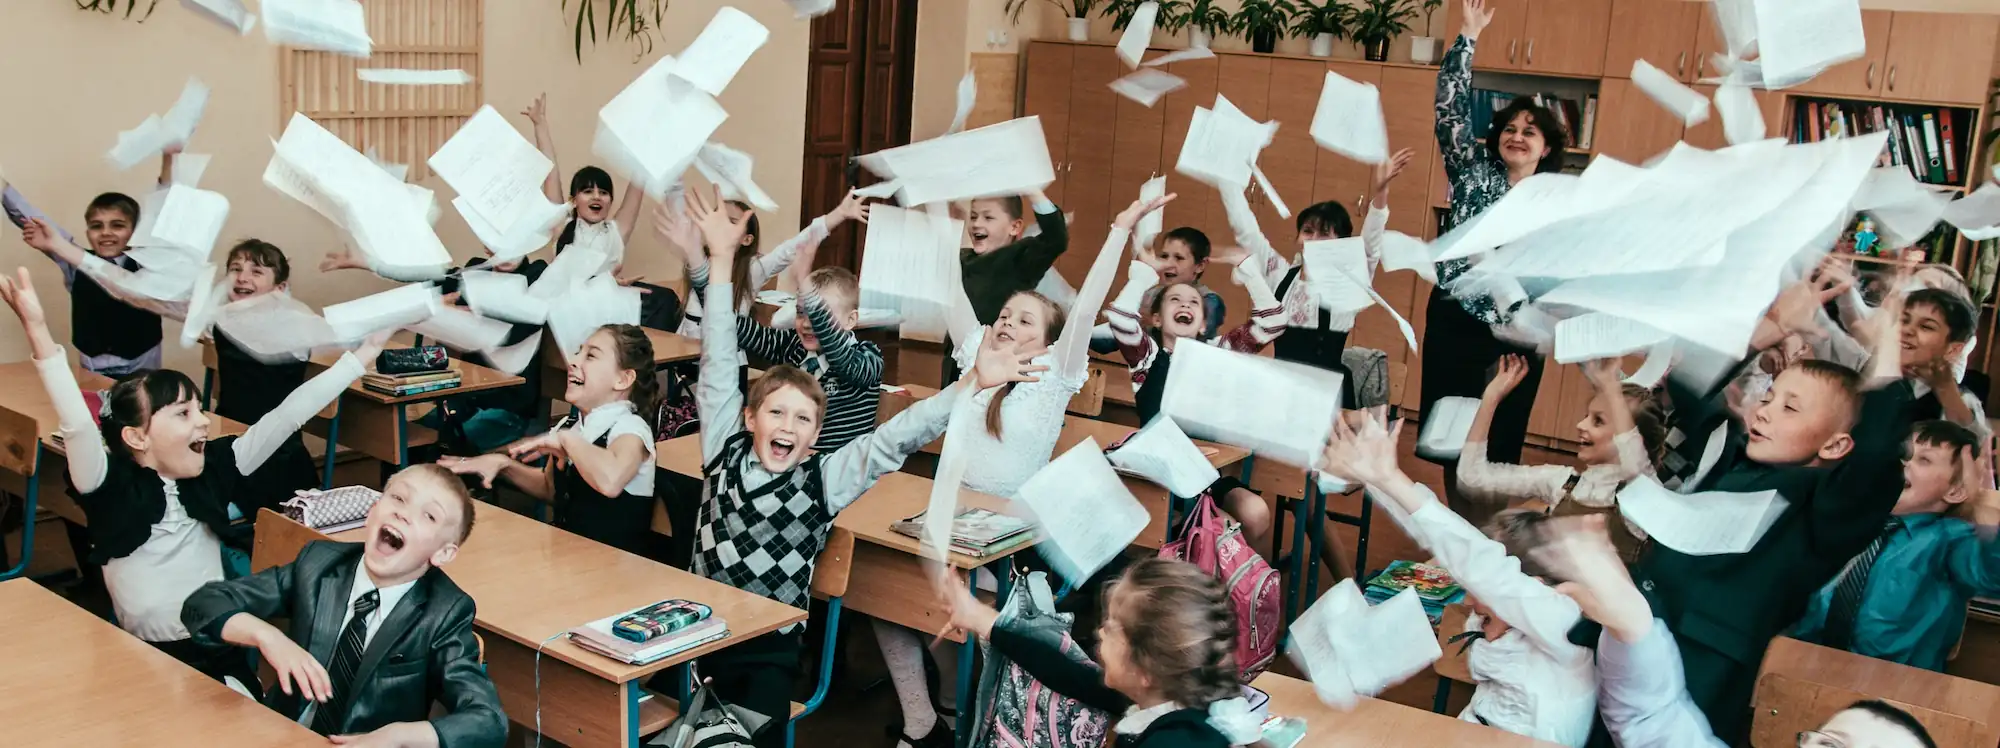 kids throwing papers